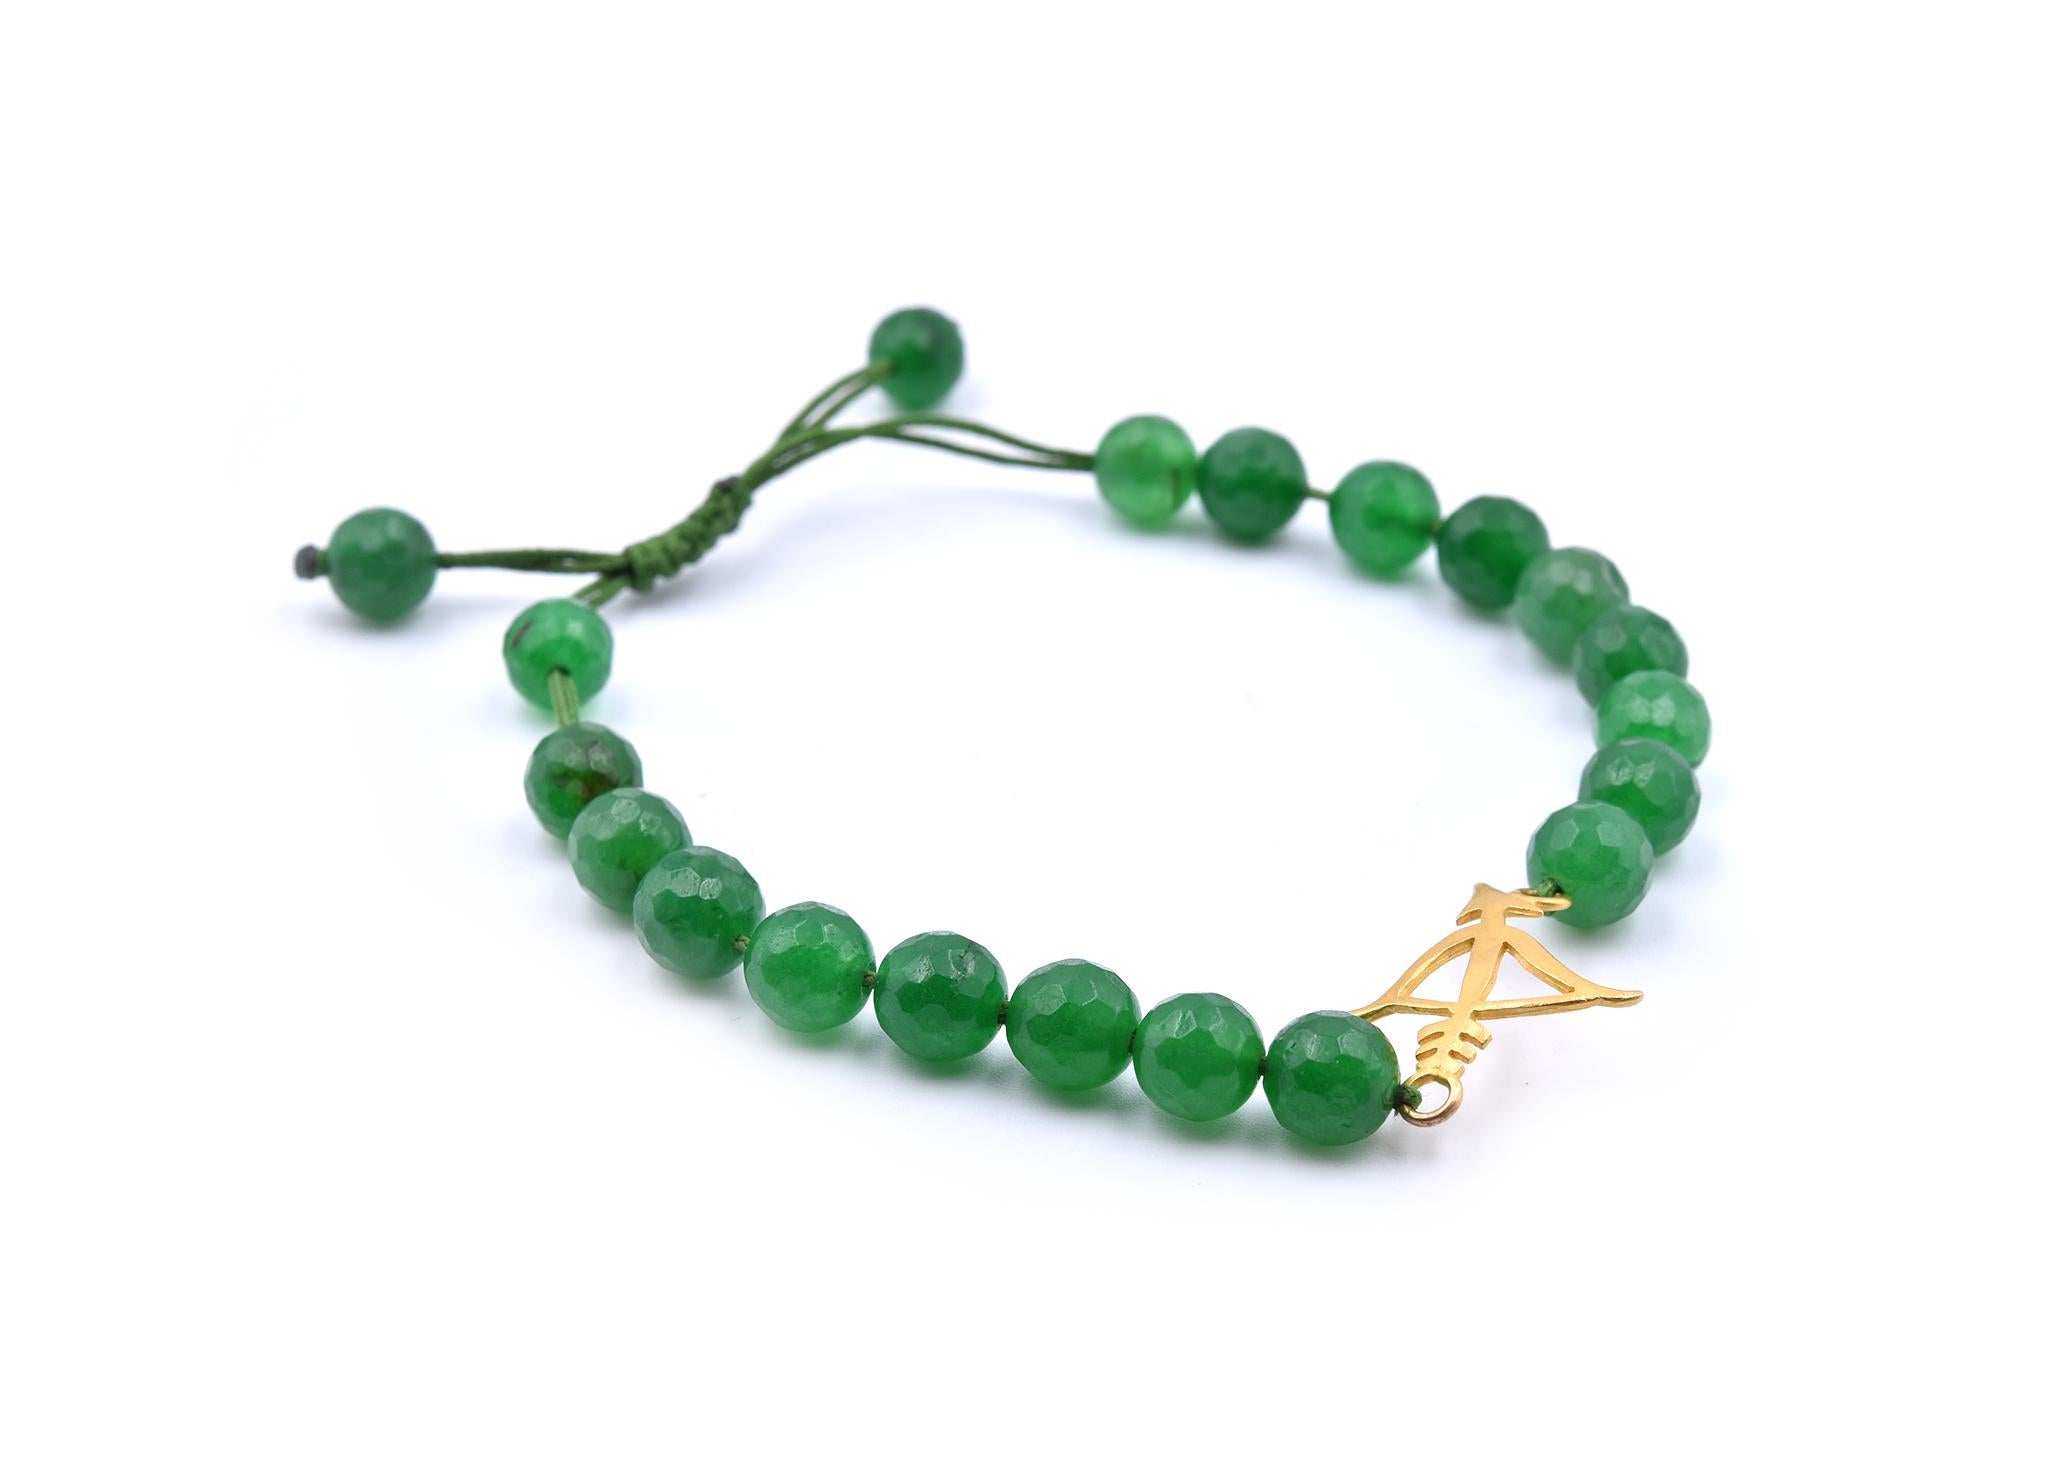 Designer: custom design
Material: 18k yellow gold 
Emerald: emerald faceted beads 
Dimensions: bracelet will fit a 7-inch wrist, it is 7.87mm wide
Weight: 14.3 grams